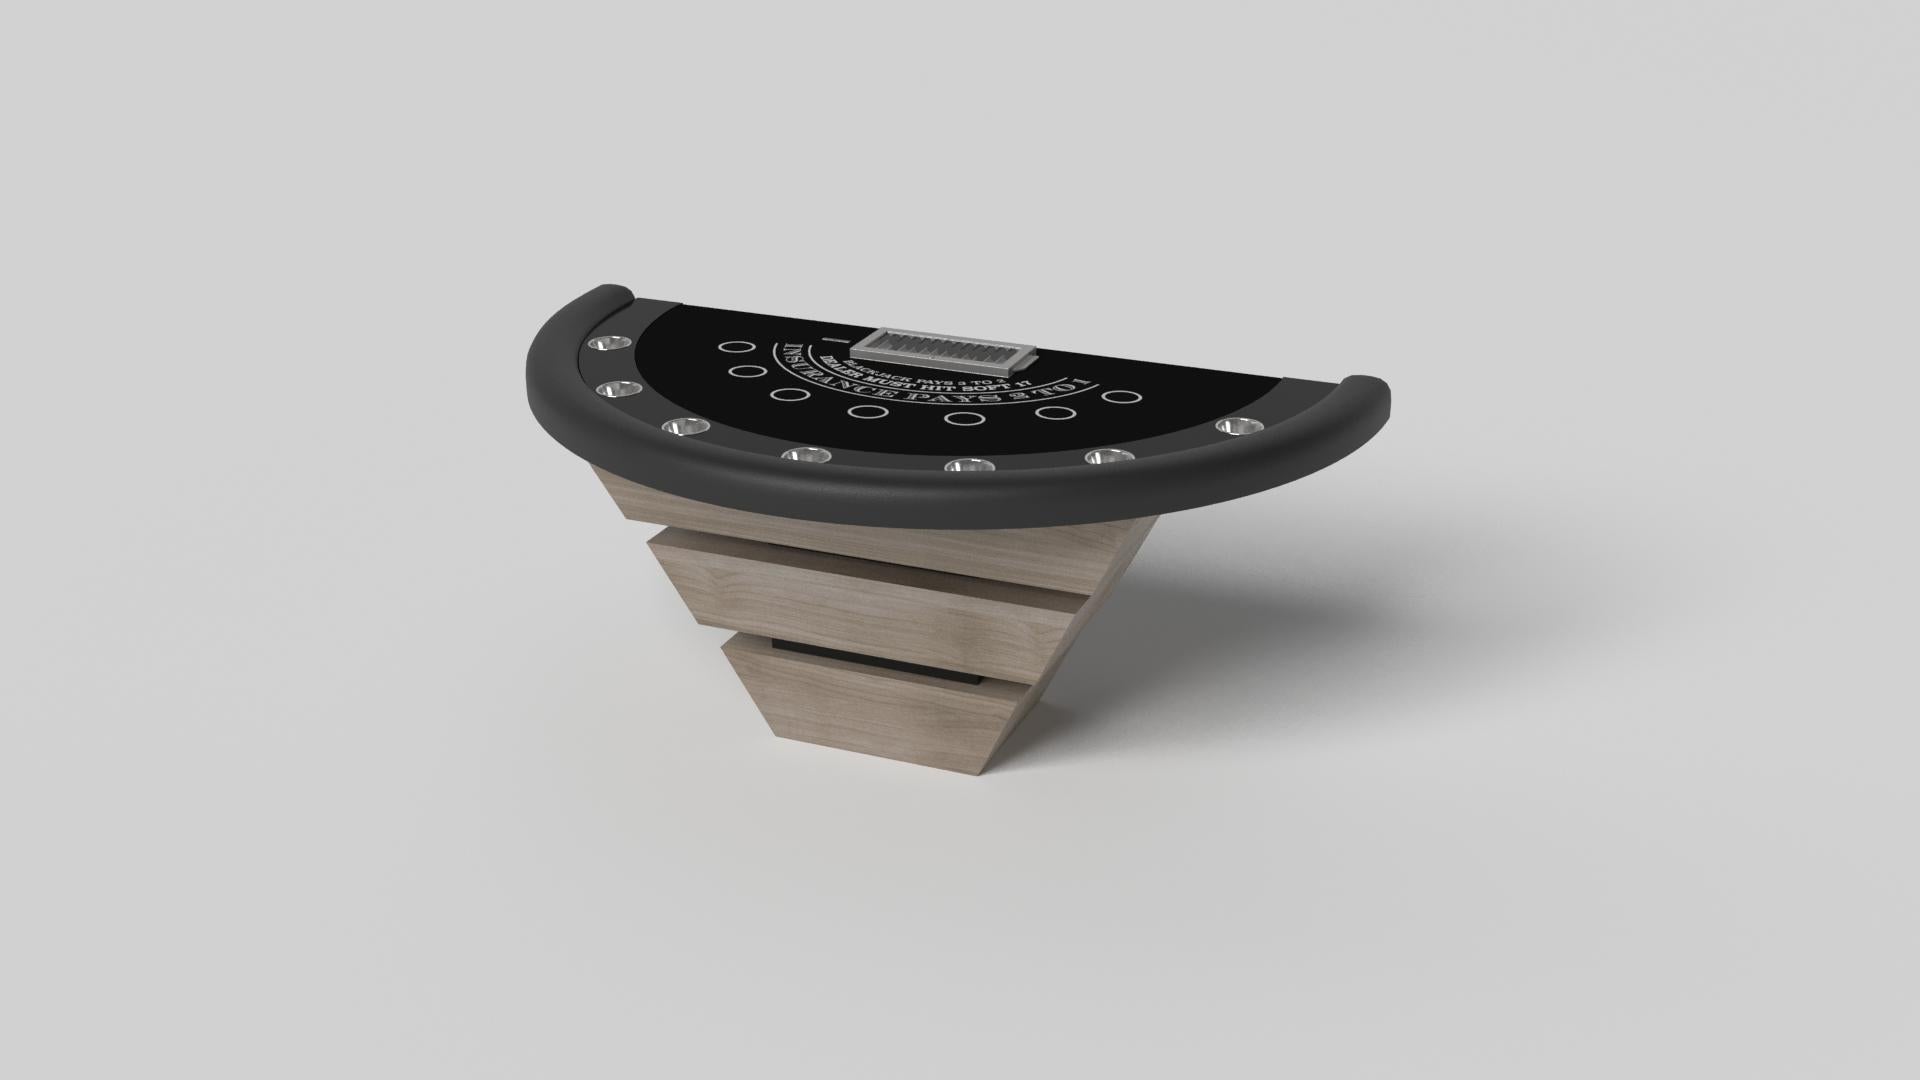 Three solid pieces of wood seemingly float around a concealed center base, making the Louve blackjack table in brushed aluminum one of our most mind-bending designs. Crafted from solid wood and detailed with a chip rack and betting circles, this